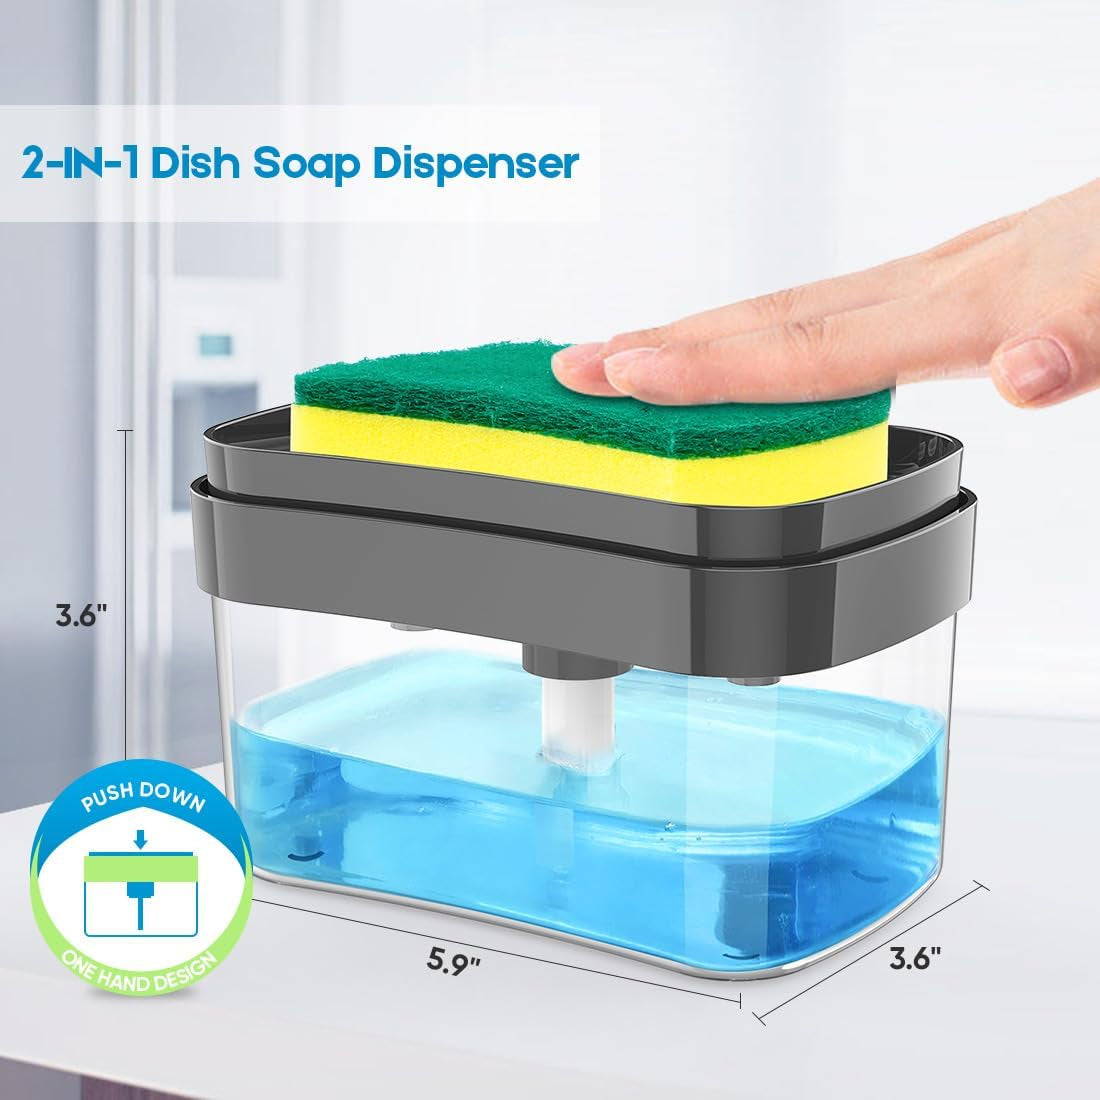 Dish Soap Dispenser with 24 Scrub Sponges for Kitchen Sink, 2 In-1 Premium Soap Dispenser with Sponge Holder, 24 Cleaning Sponges with Dishwashing Soap Pump Dispenser for Kitchen Countertop